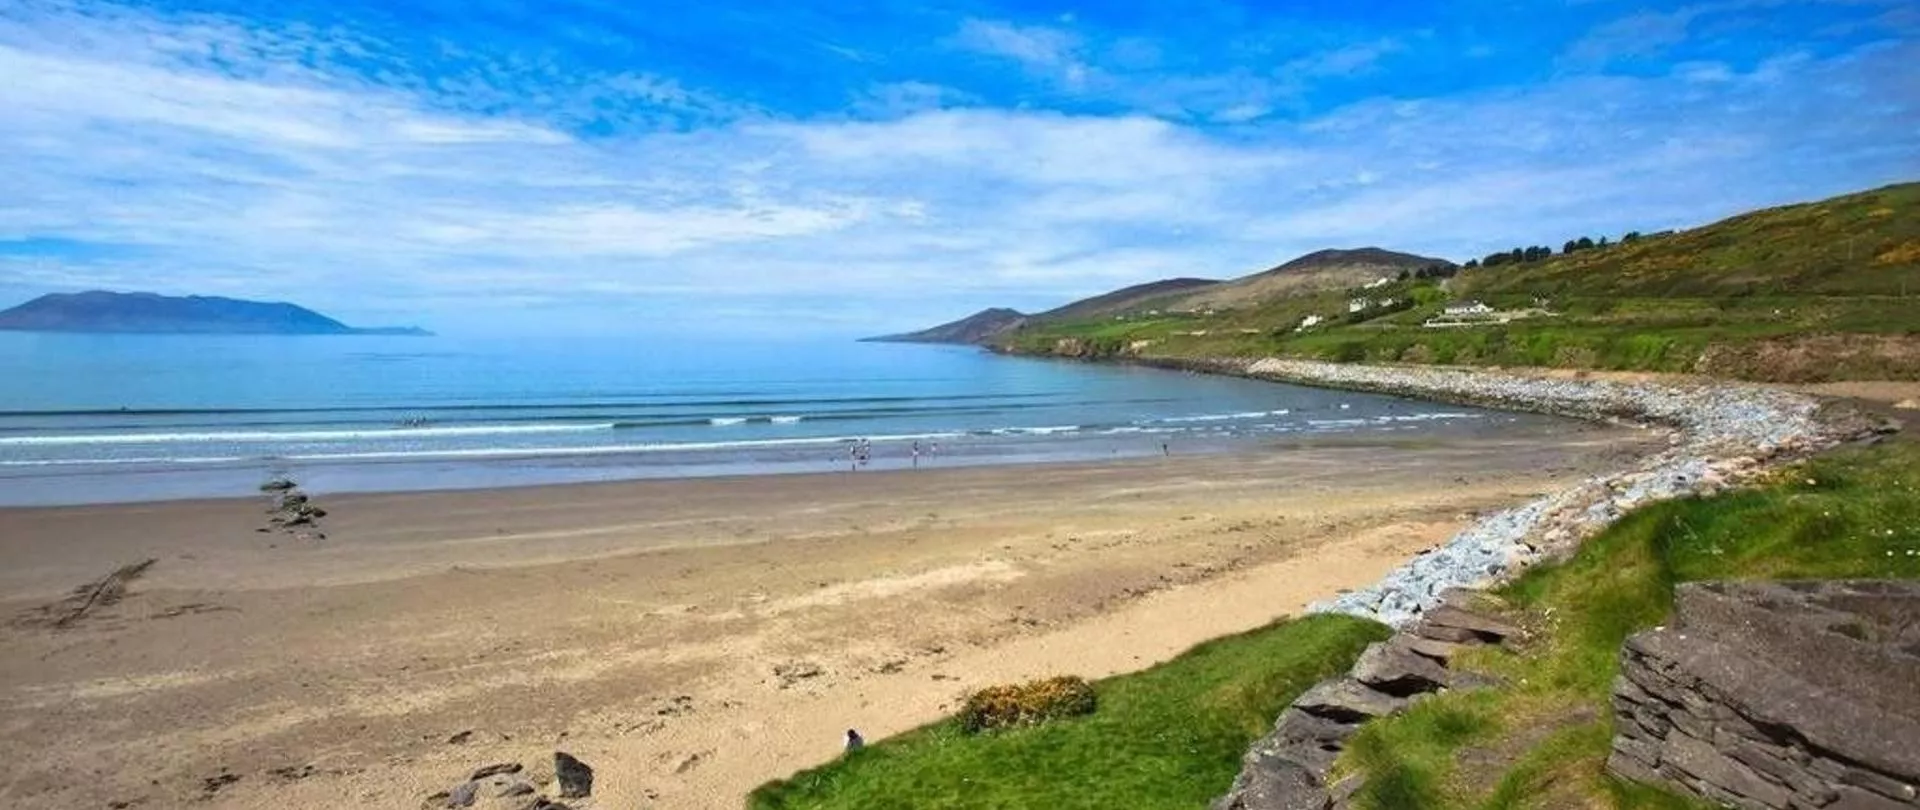 Inch Beach in Ireland, Europe | Surfing,Beaches - Rated 3.8